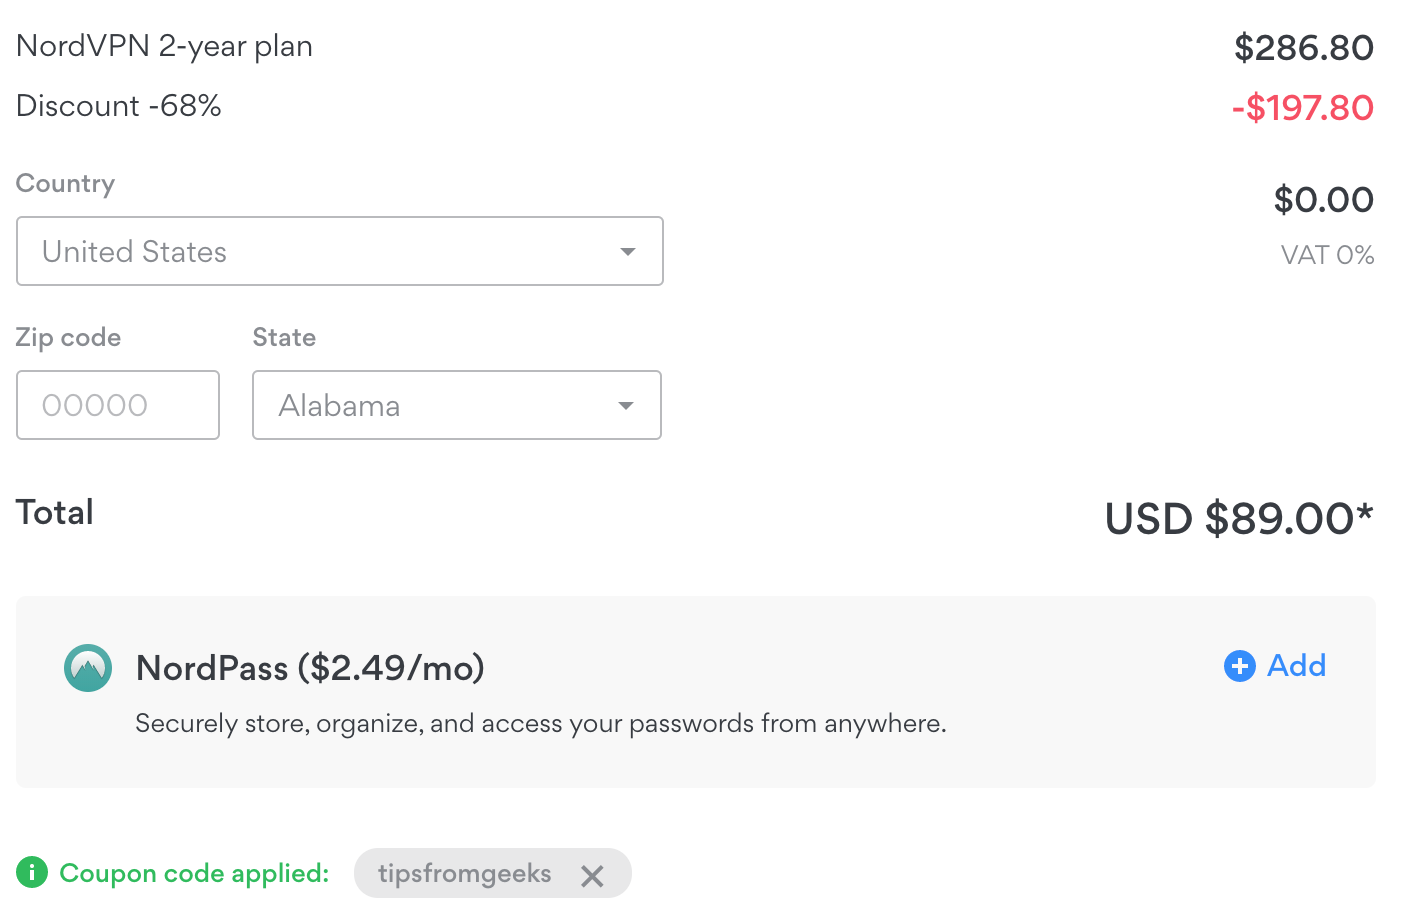 NordVPN on discount with tipsfromgeeks from only $3.71/month